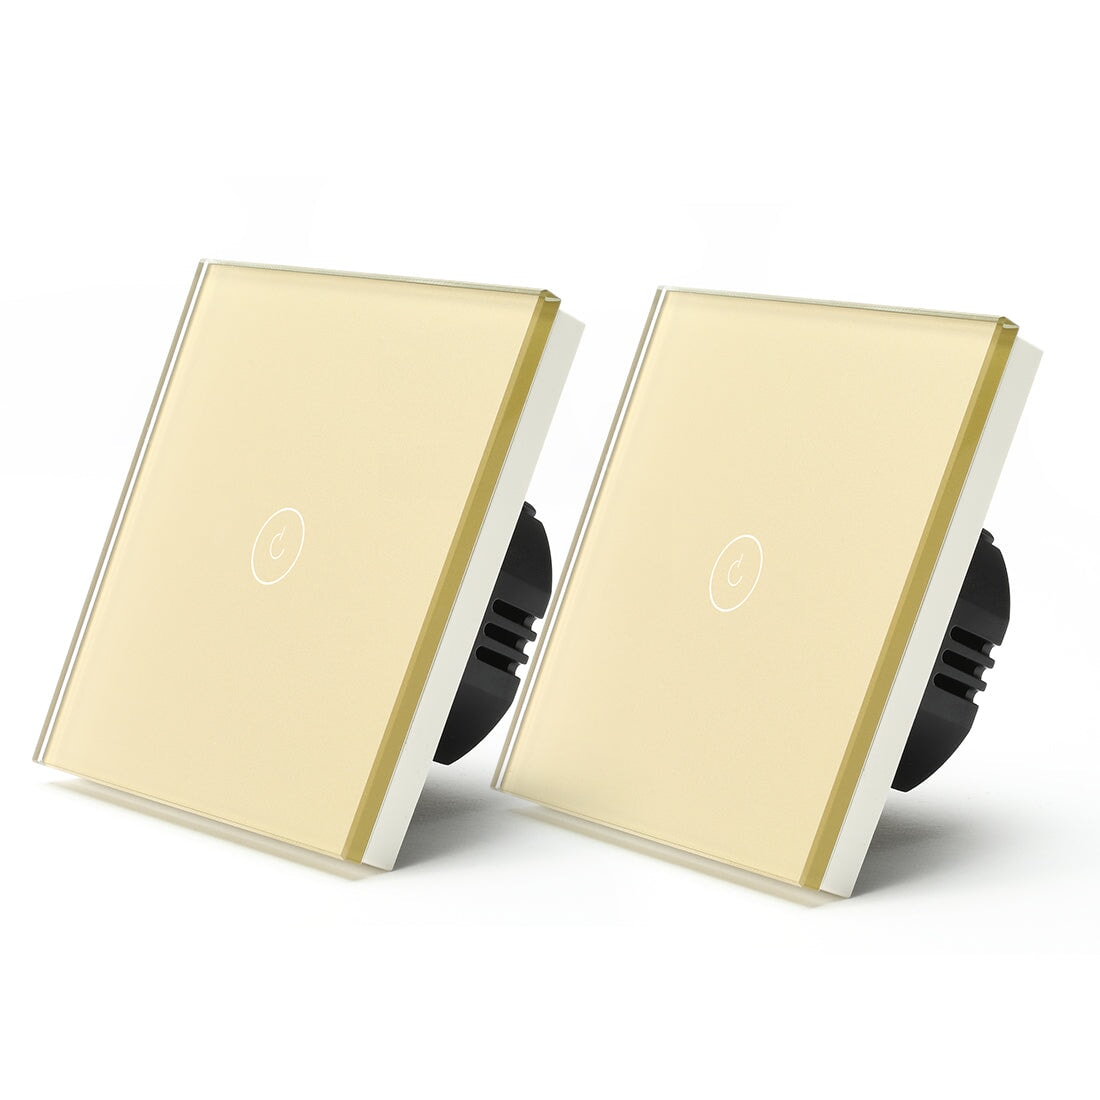 Bseed Smart Wifi Touch Switch 1 Gang 1/2/3 Way Wall Plates & Covers Bseedswitch Golden 2Pcs/Pack 